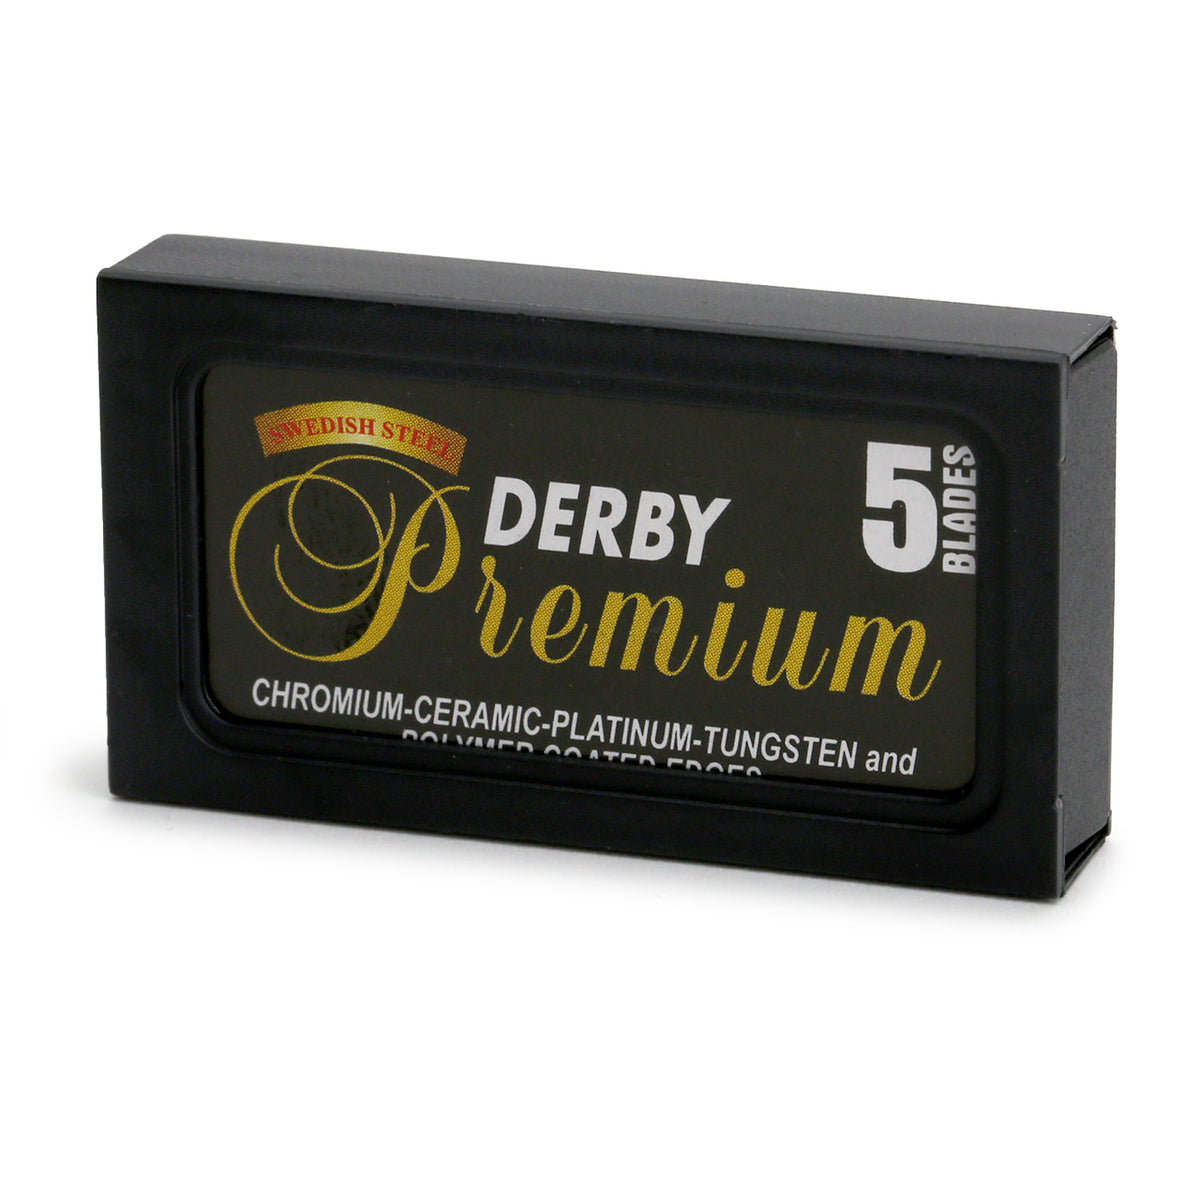 Derby Premium tuck of 5 blades comes in a black travel container which will hold the used blades in the back